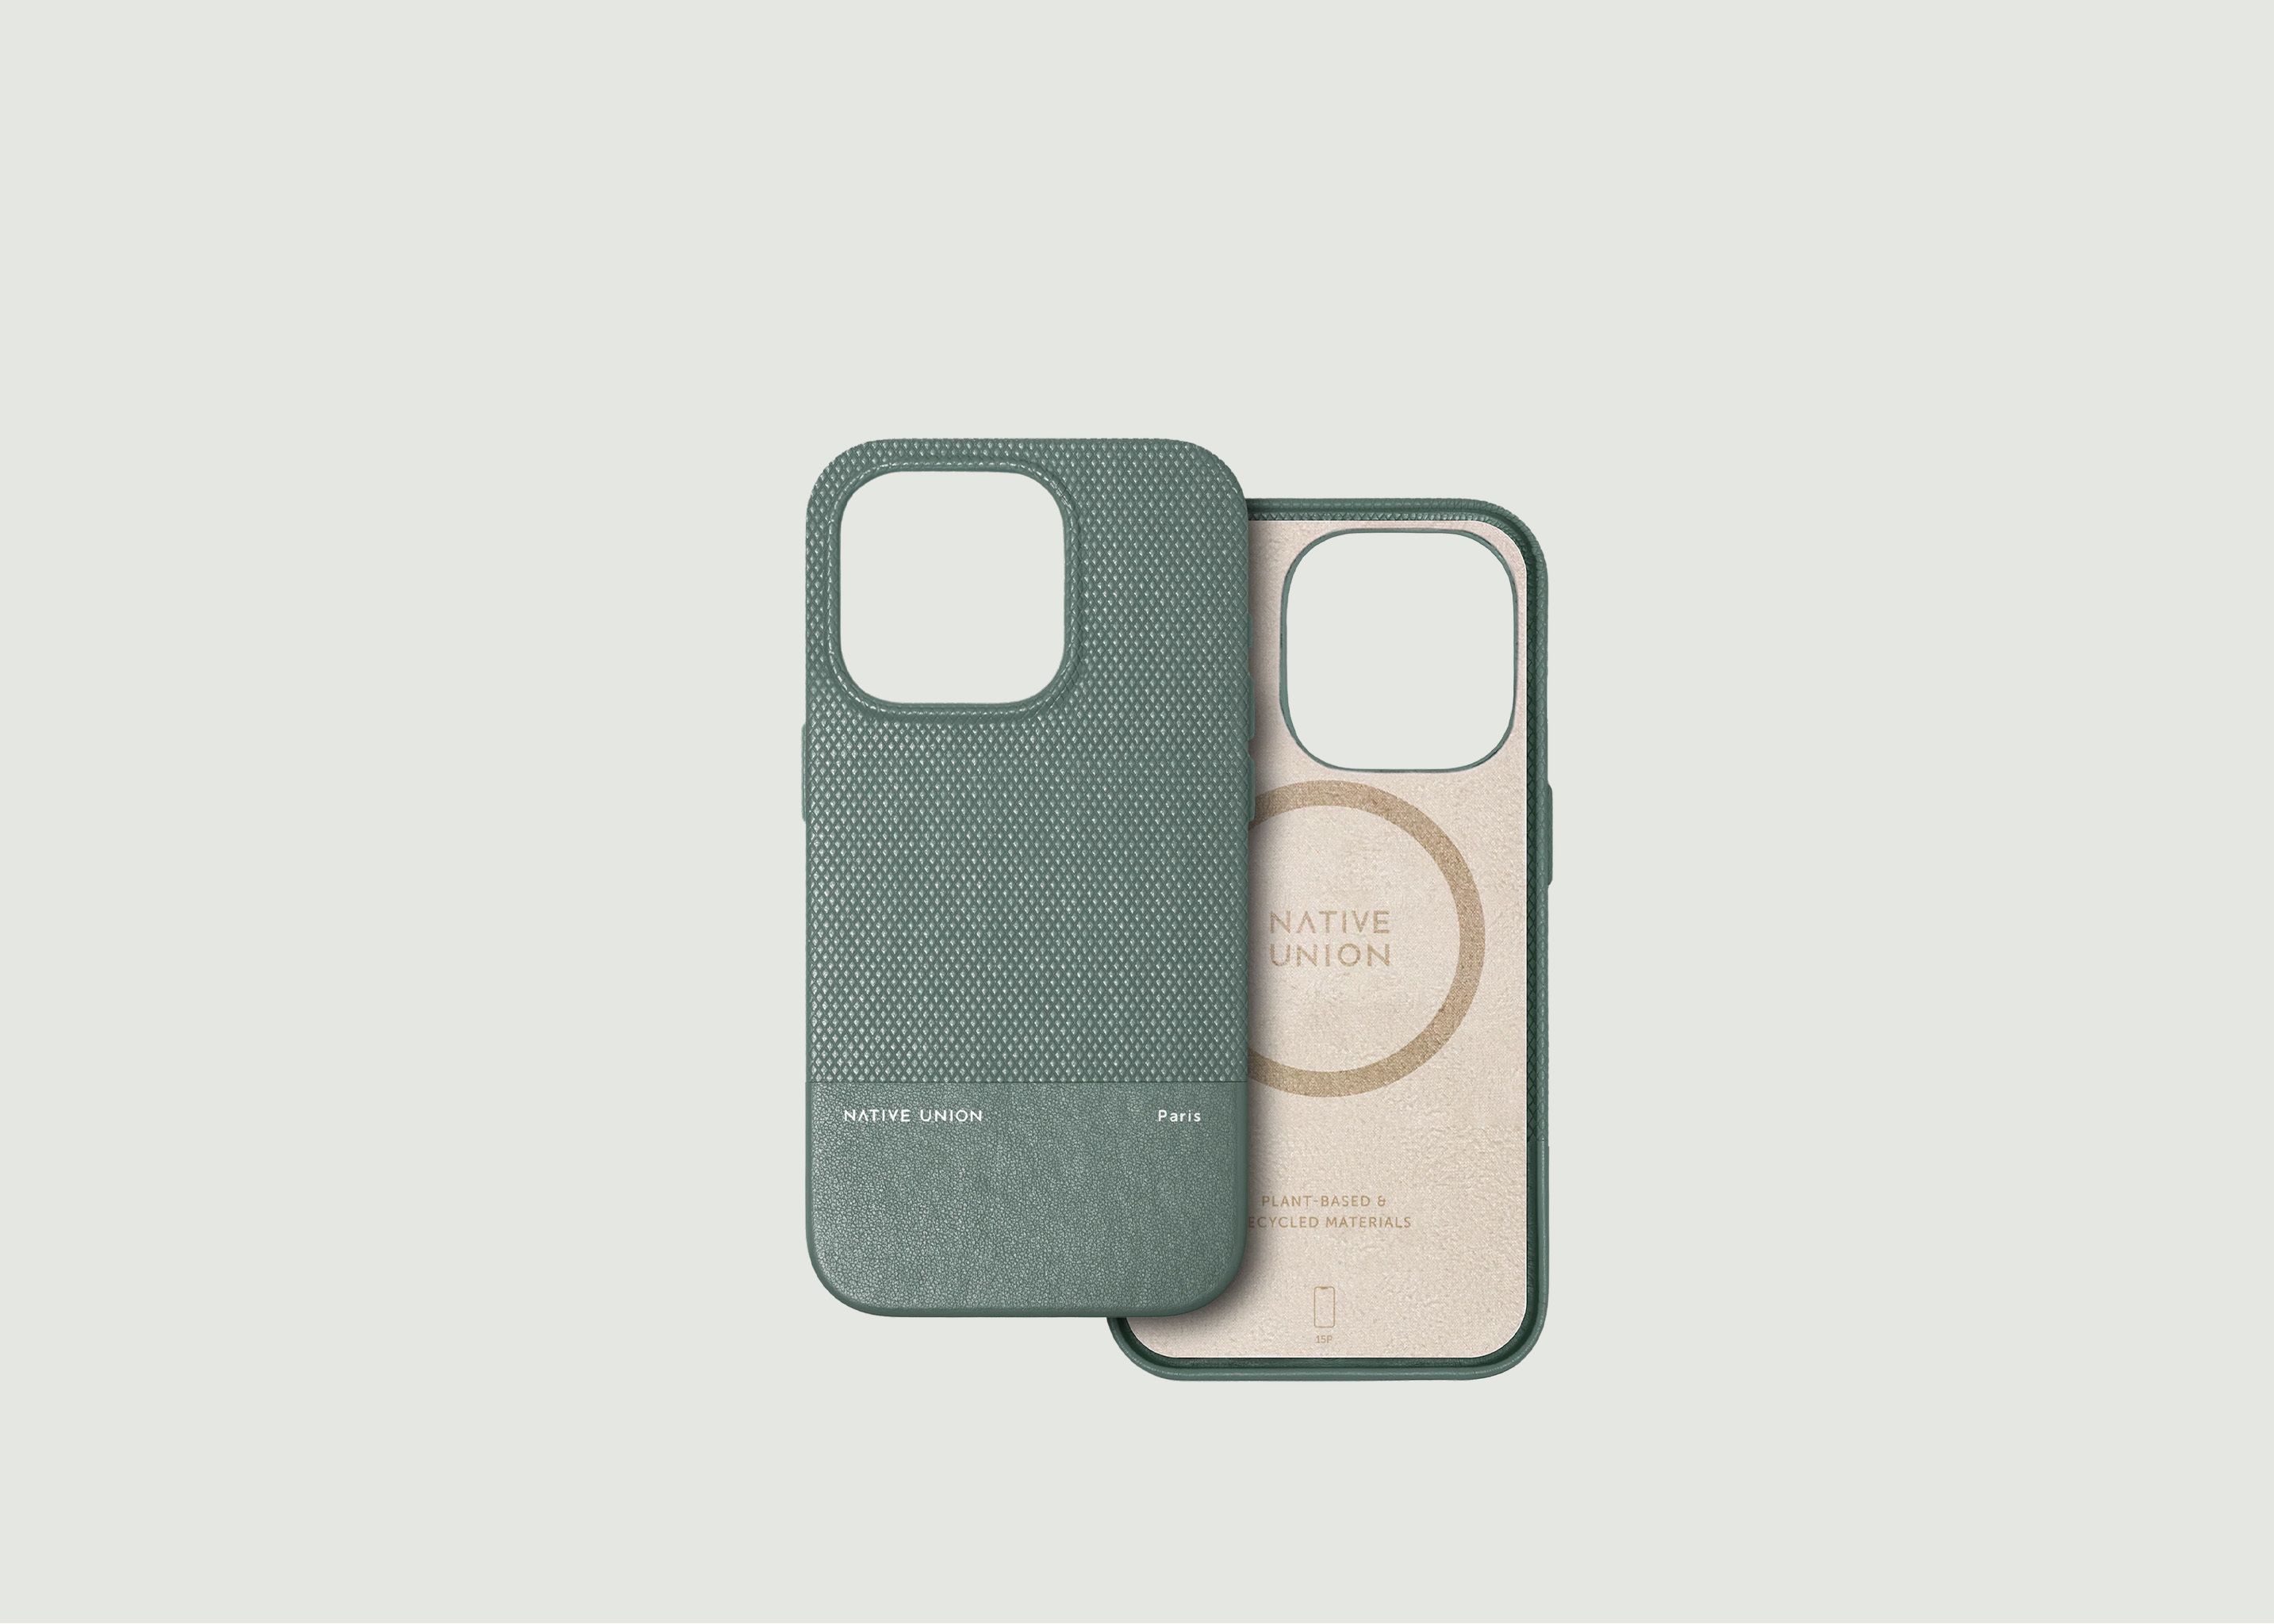 (Re)Classic iPhone Cover - Native Union